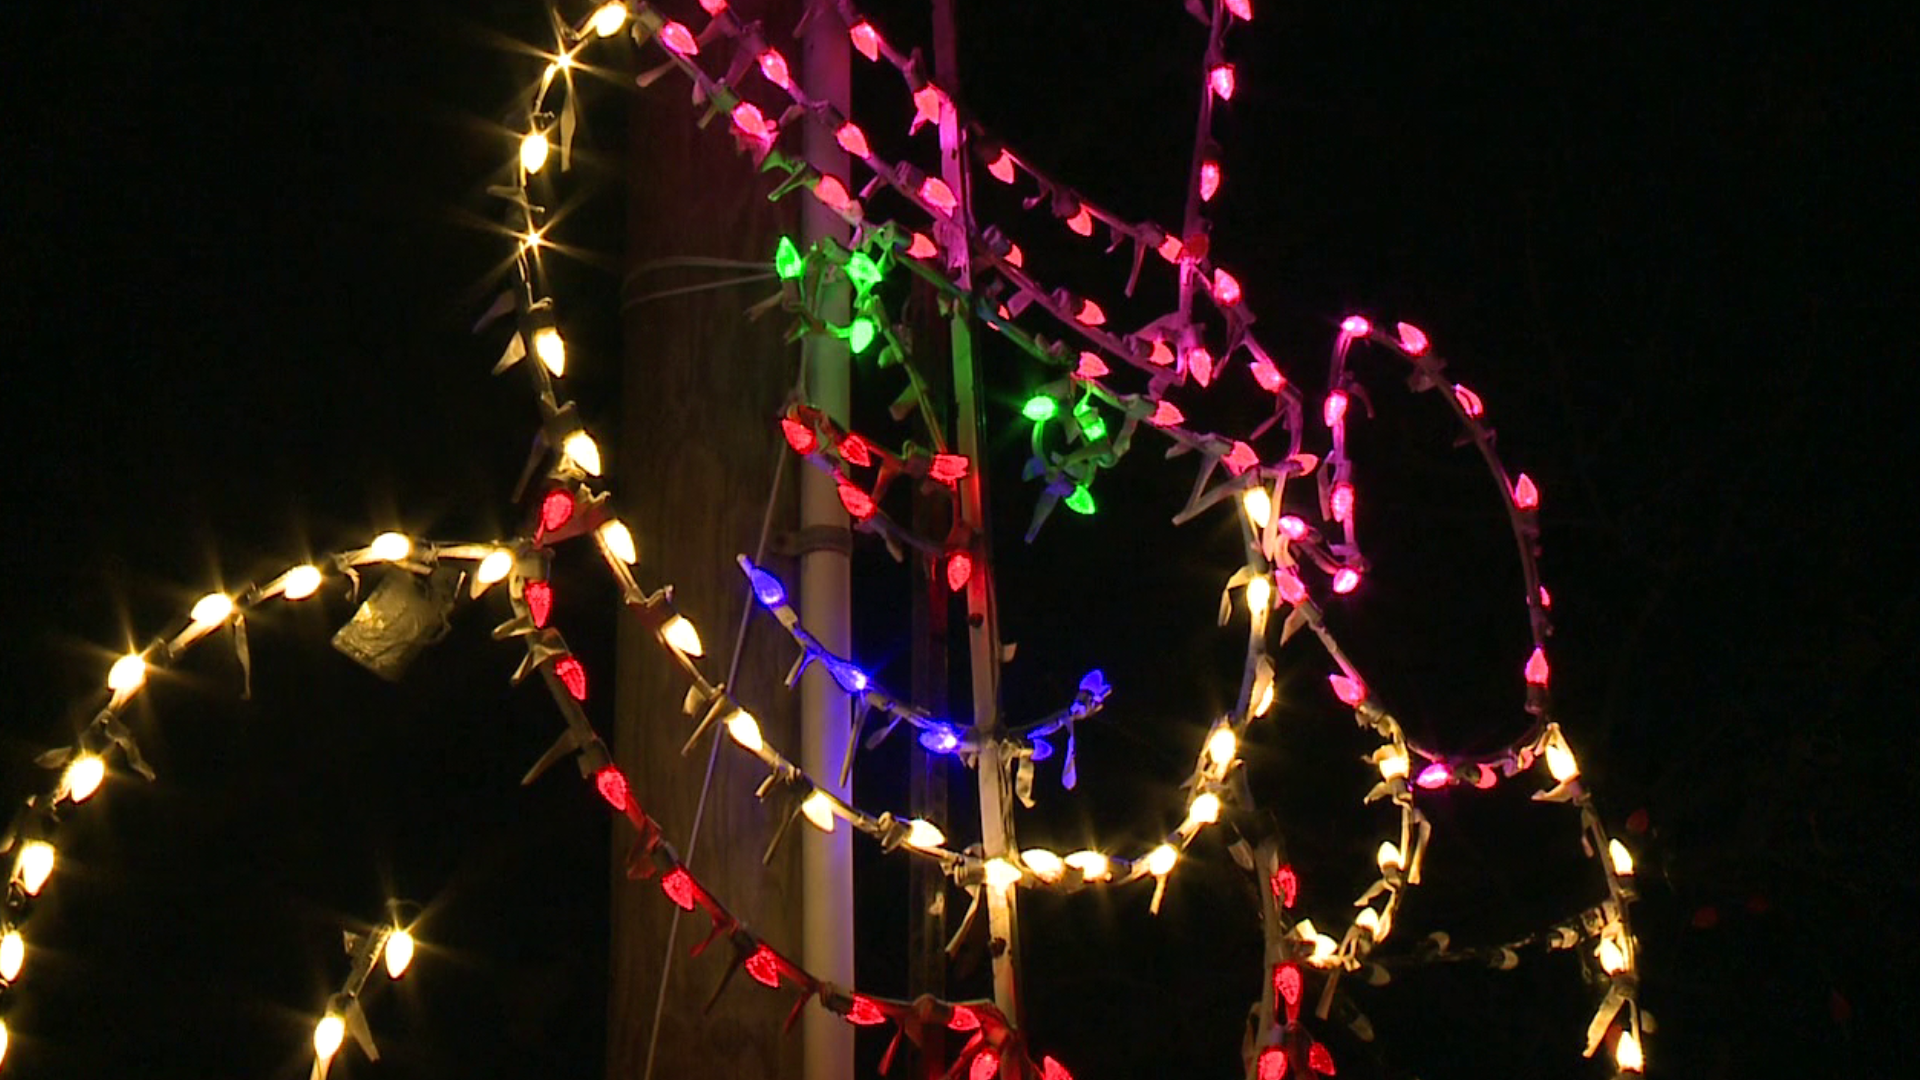 The annual holiday light show in Scranton kicked off Friday evening.